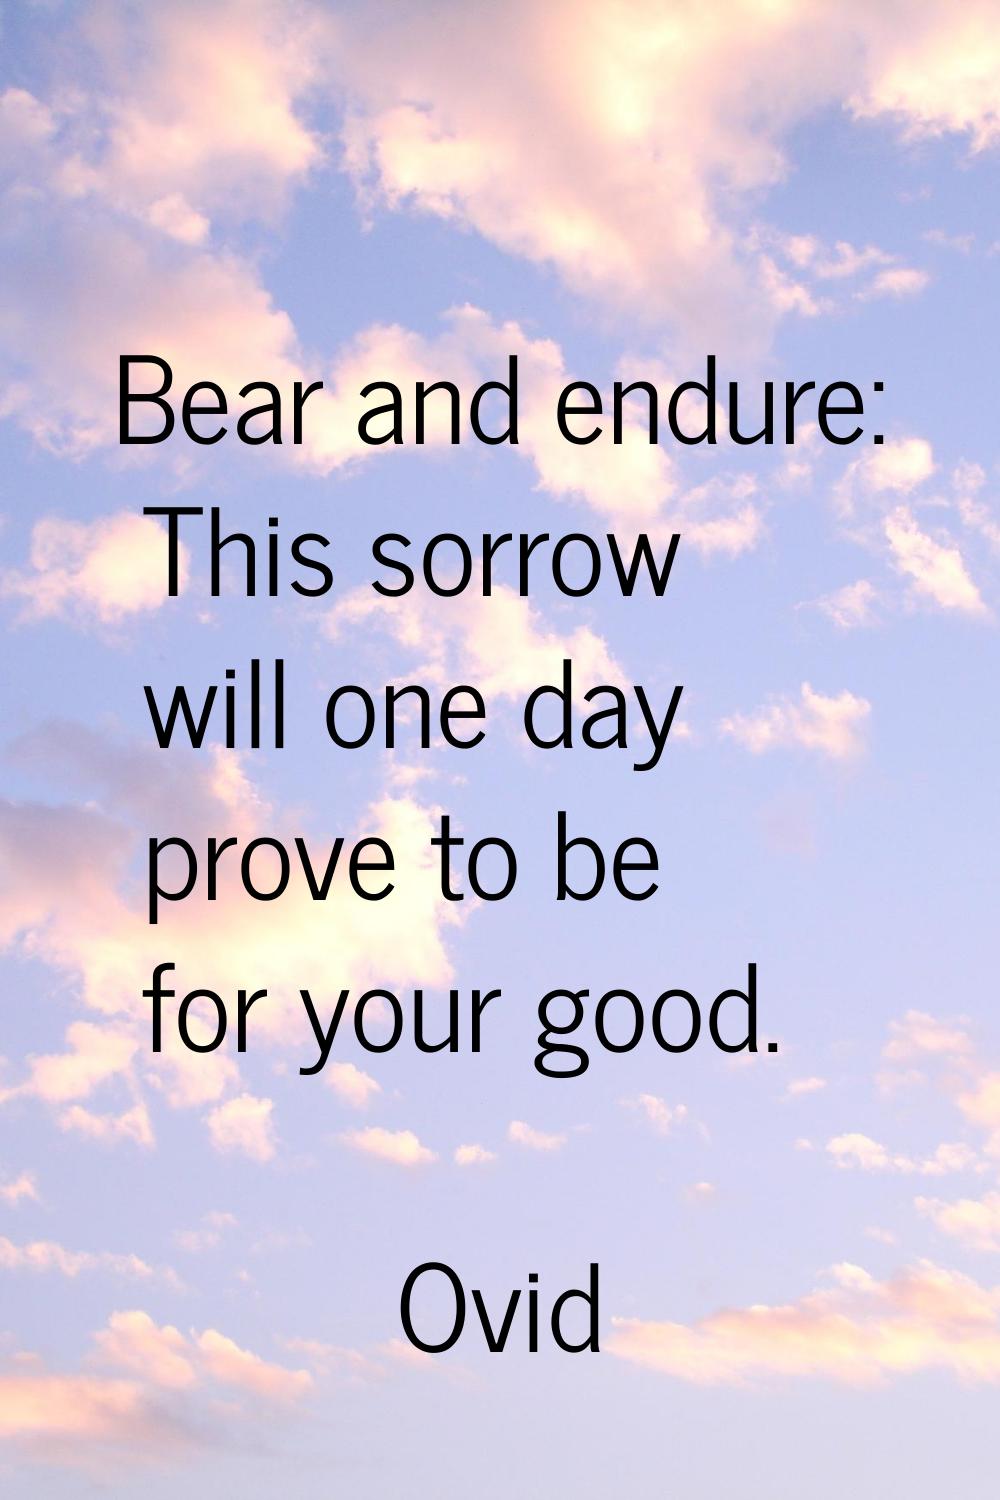 Bear and endure: This sorrow will one day prove to be for your good.